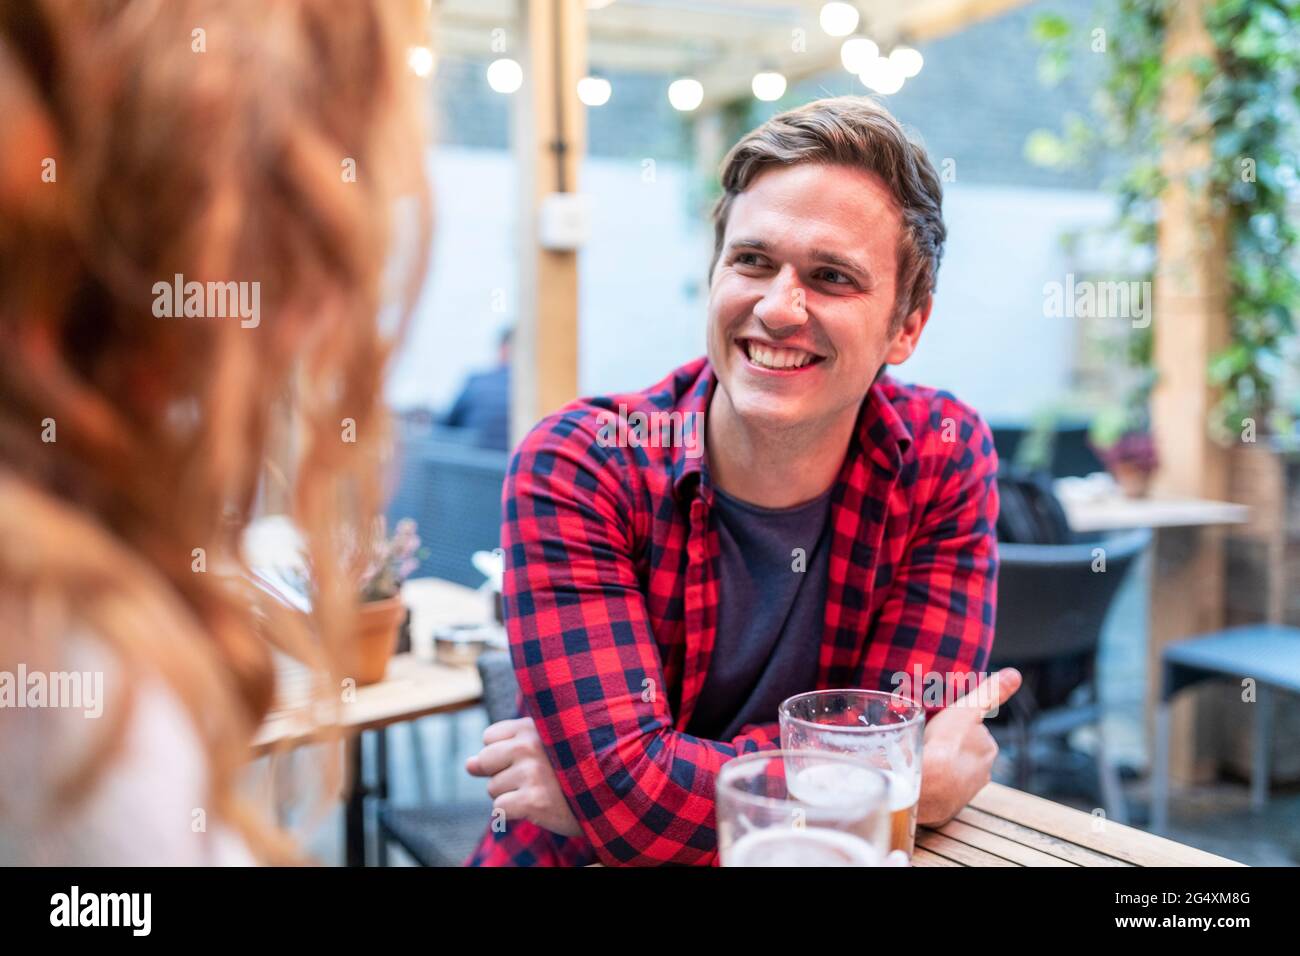 Smiling man looking at girlfriend in pub Stock Photo